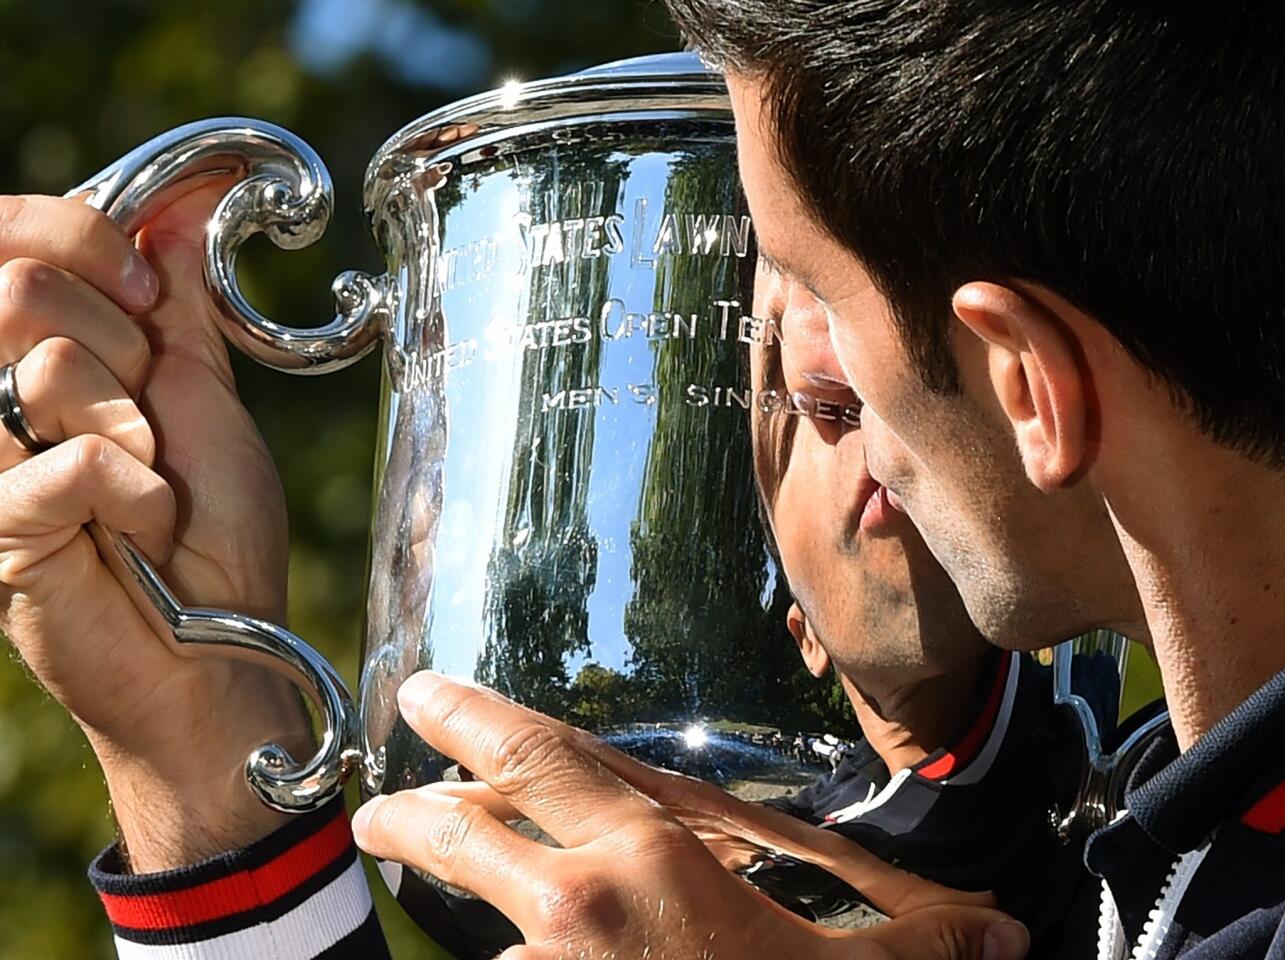 Novak Djokovic of Serbia kisses his championship trophy in Central Park in New York September 14, 2015 the morning after defeating Roger Federer of Switzerland to win the 2015 US Open Men's Singles Finals. AFP PHOTO / TIMOTHY A. CLARYTIMOTHY A. CLARY/AFP/Getty Images ** OUTS - ELSENT, FPG - OUTS * NM, PH, VA if sourced by CT, LA or MoD **